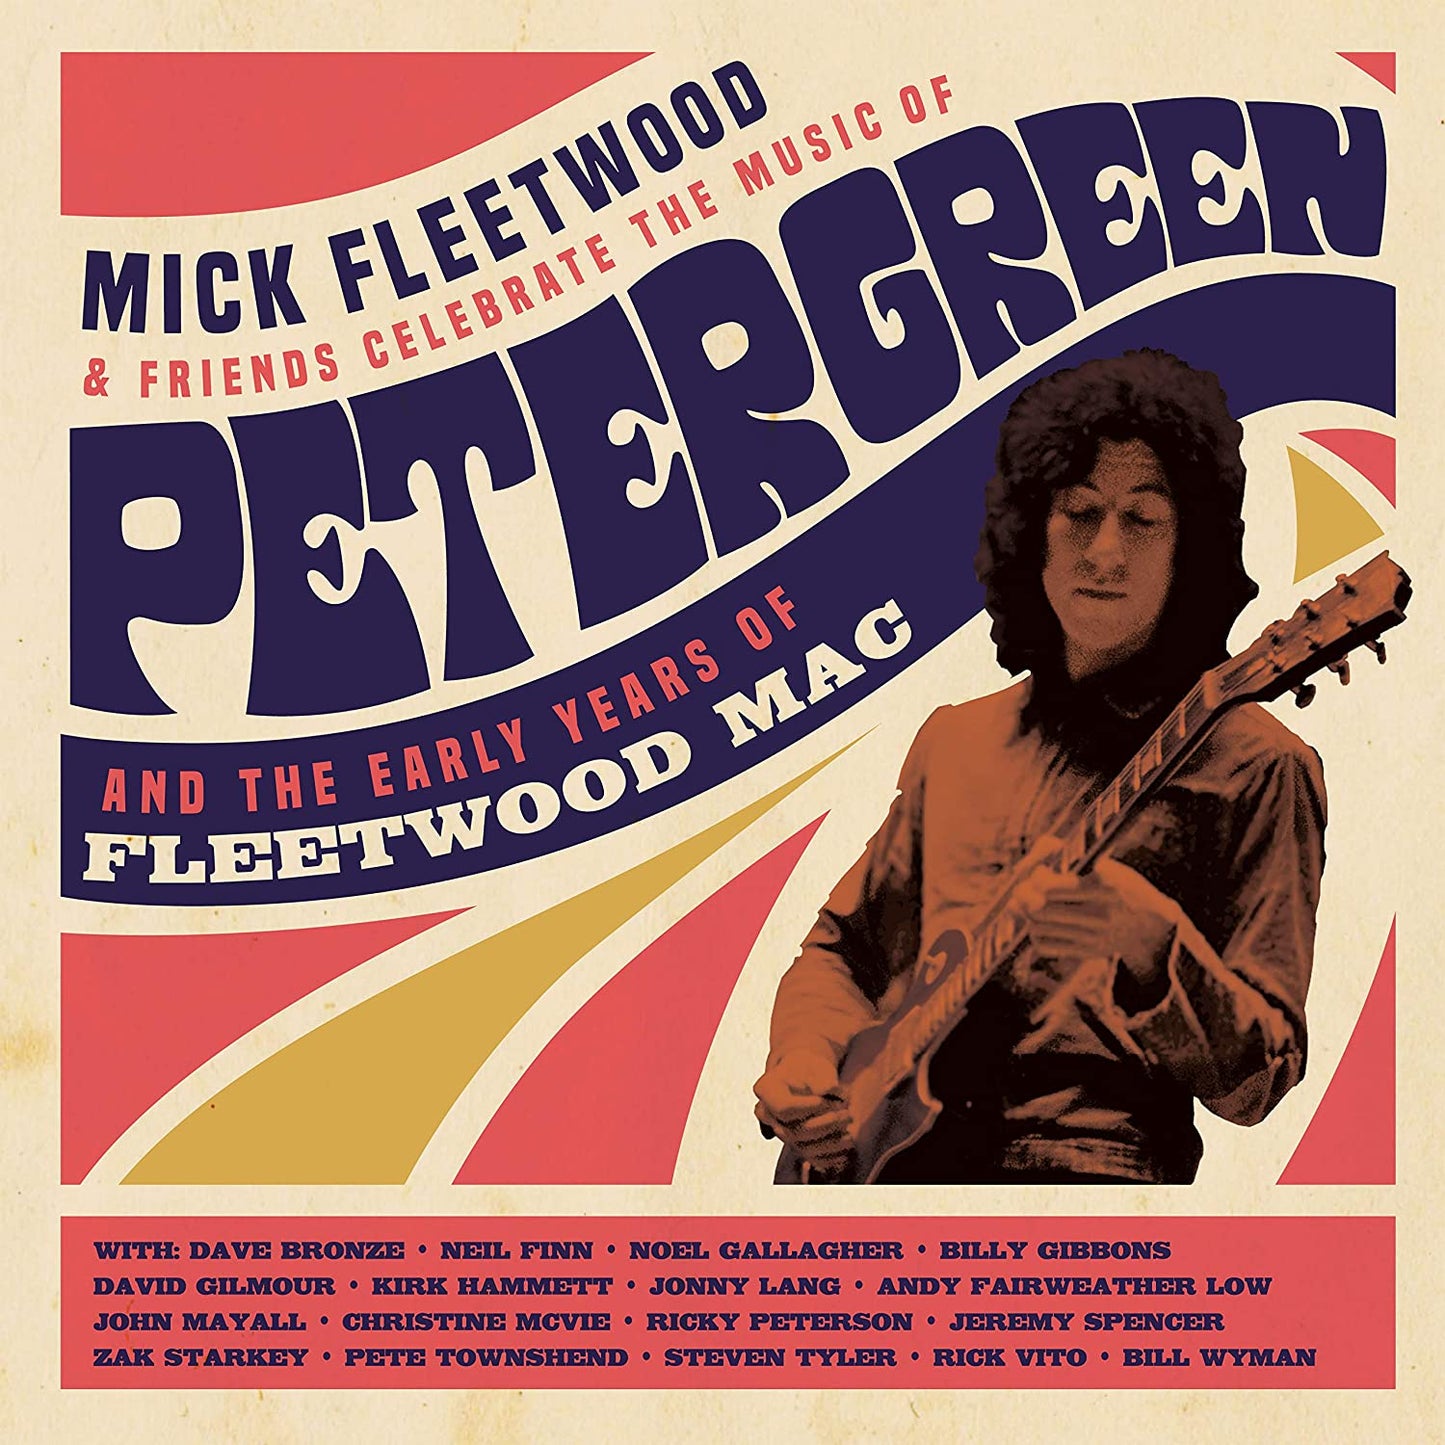 Mick Fleetwood - Celebrate The Music Of Peter Green And The Early Years Of Fleetwood Mac - 2CD